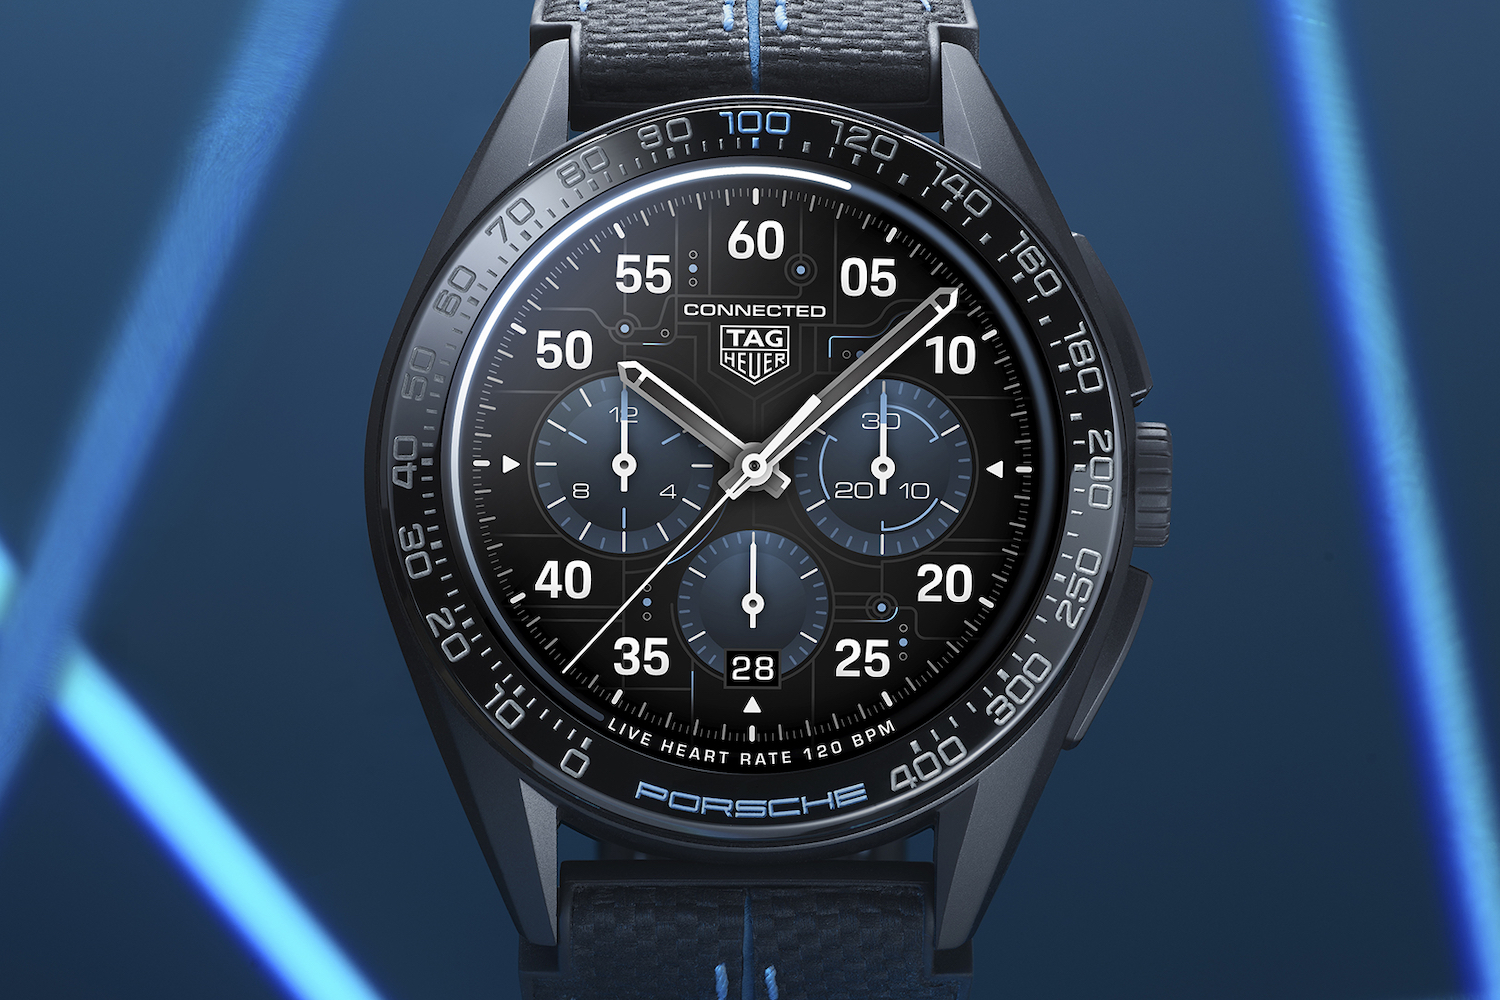 Graan Glimmend Wardianzaak Tag Heuer's new smartwatch goes perfectly with your Porsche | Digital Trends